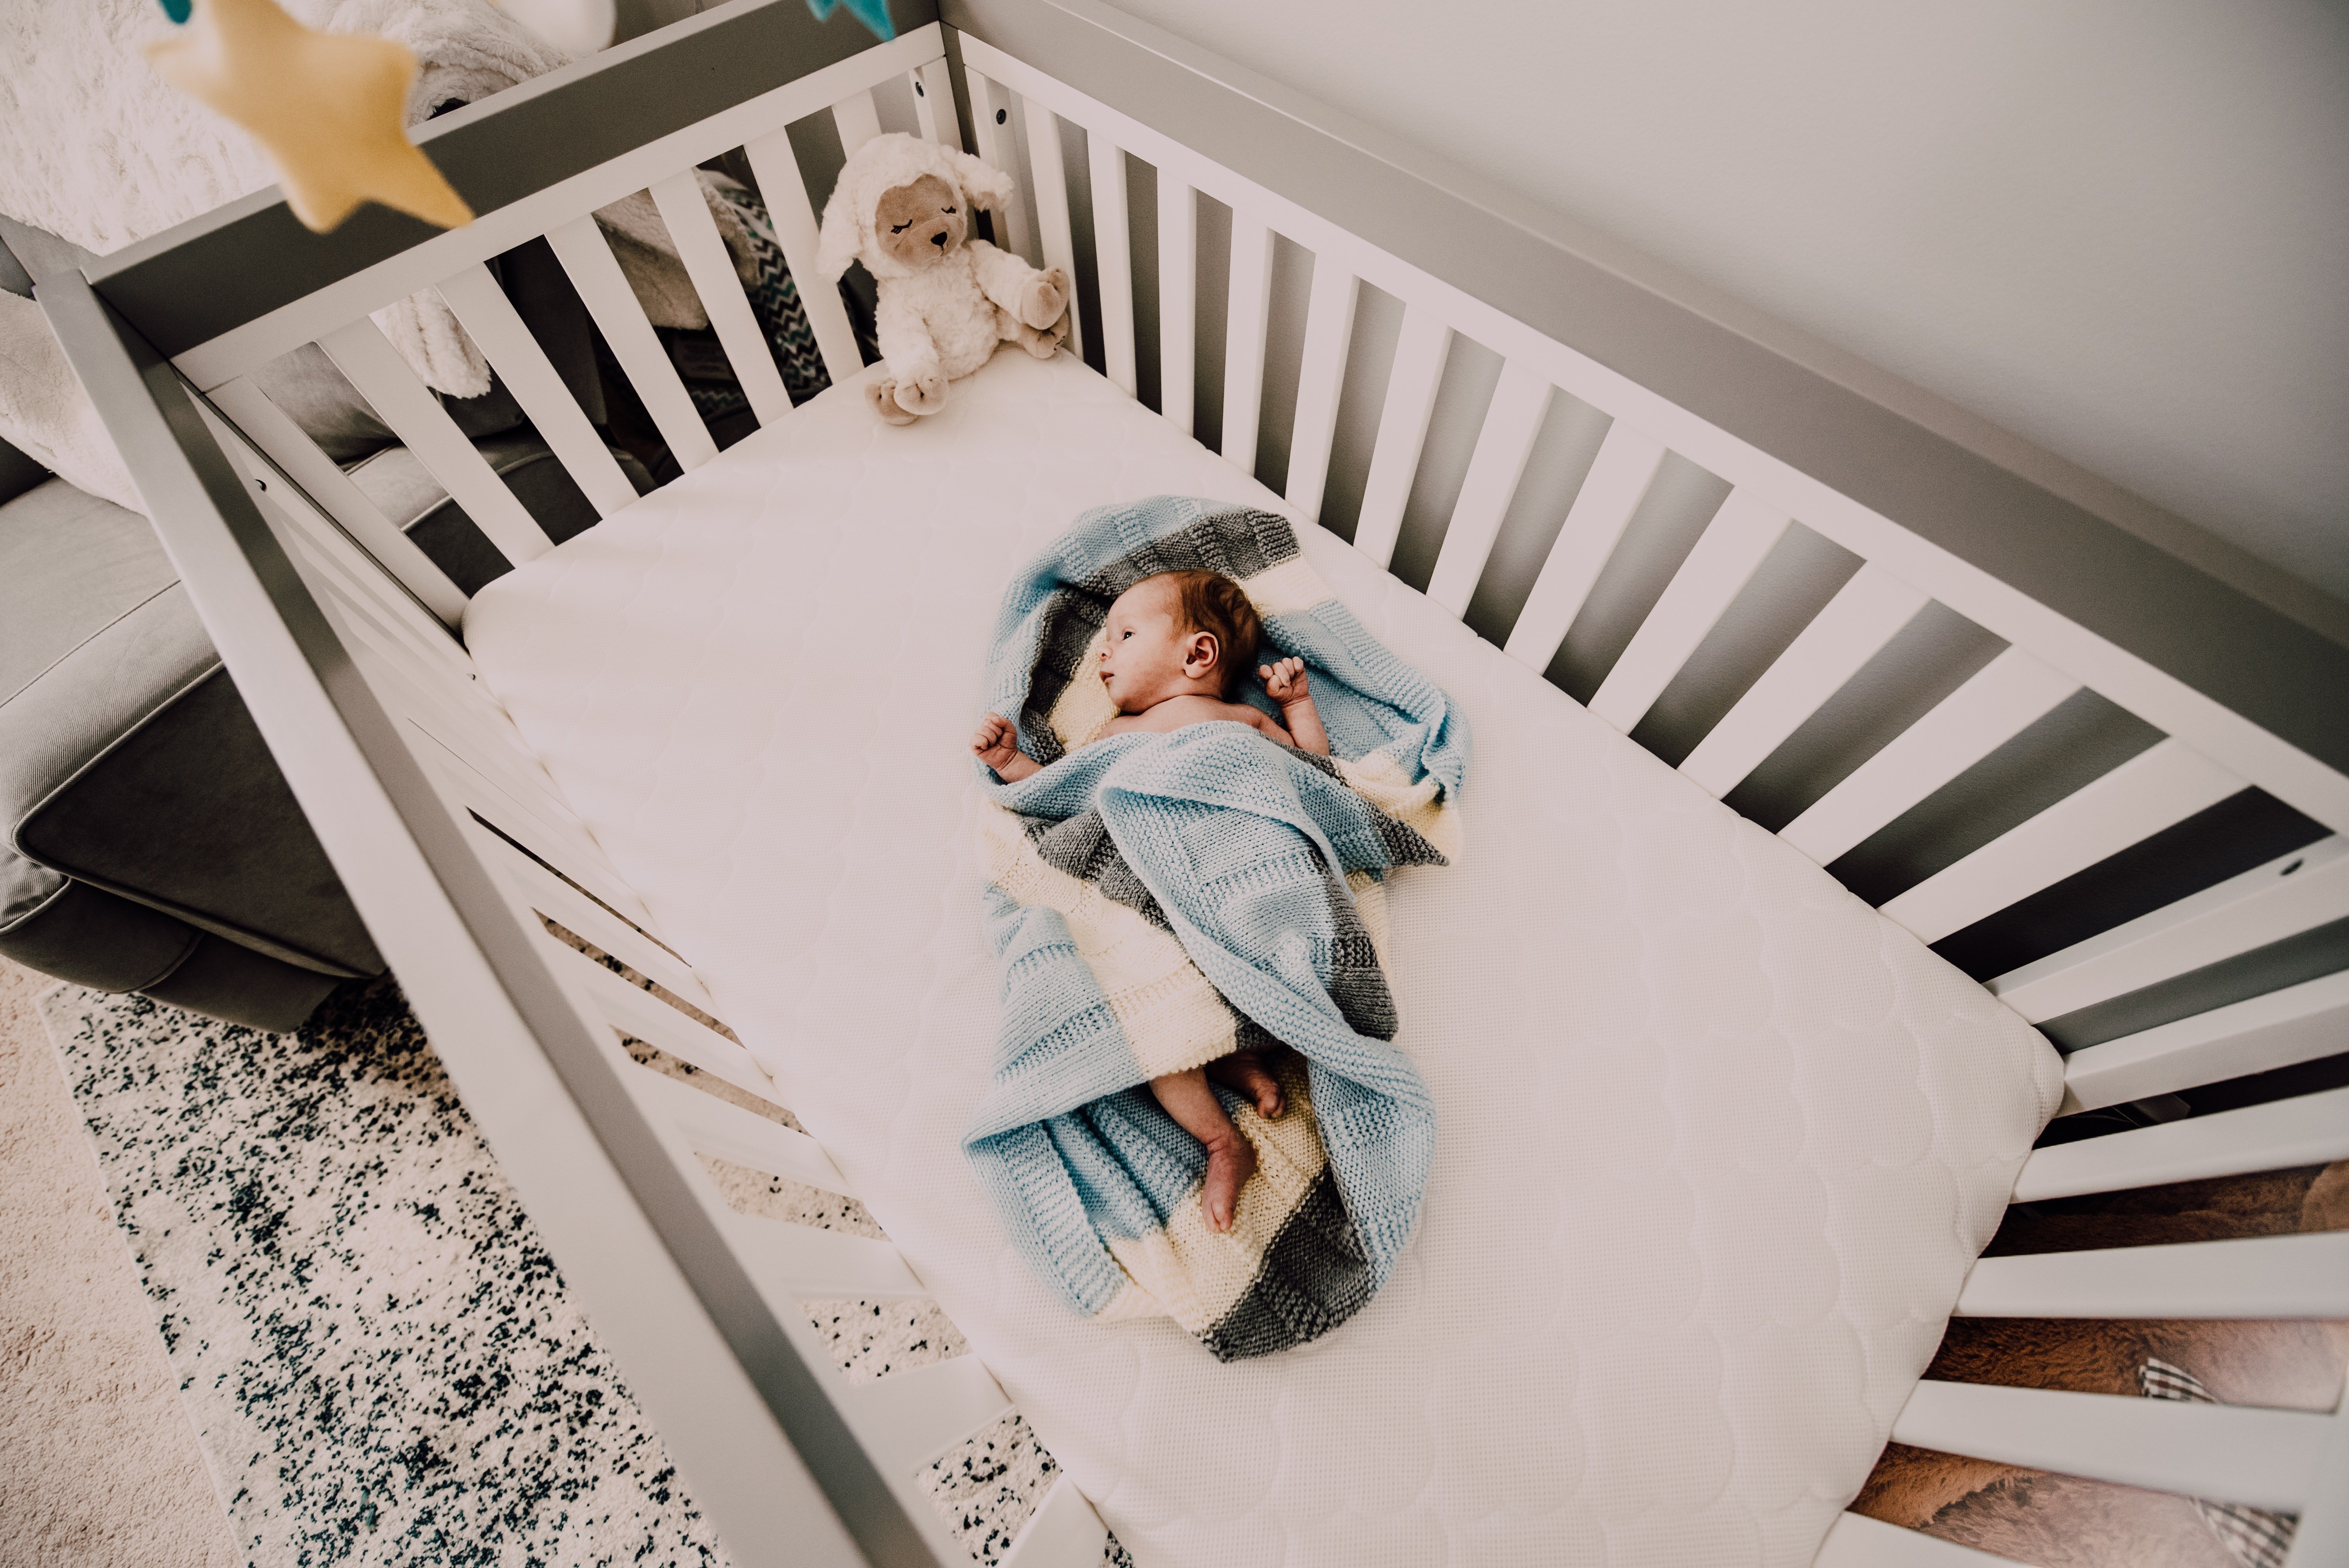 The mother had put the baby in a crib in a separate room | Photo: Pexels